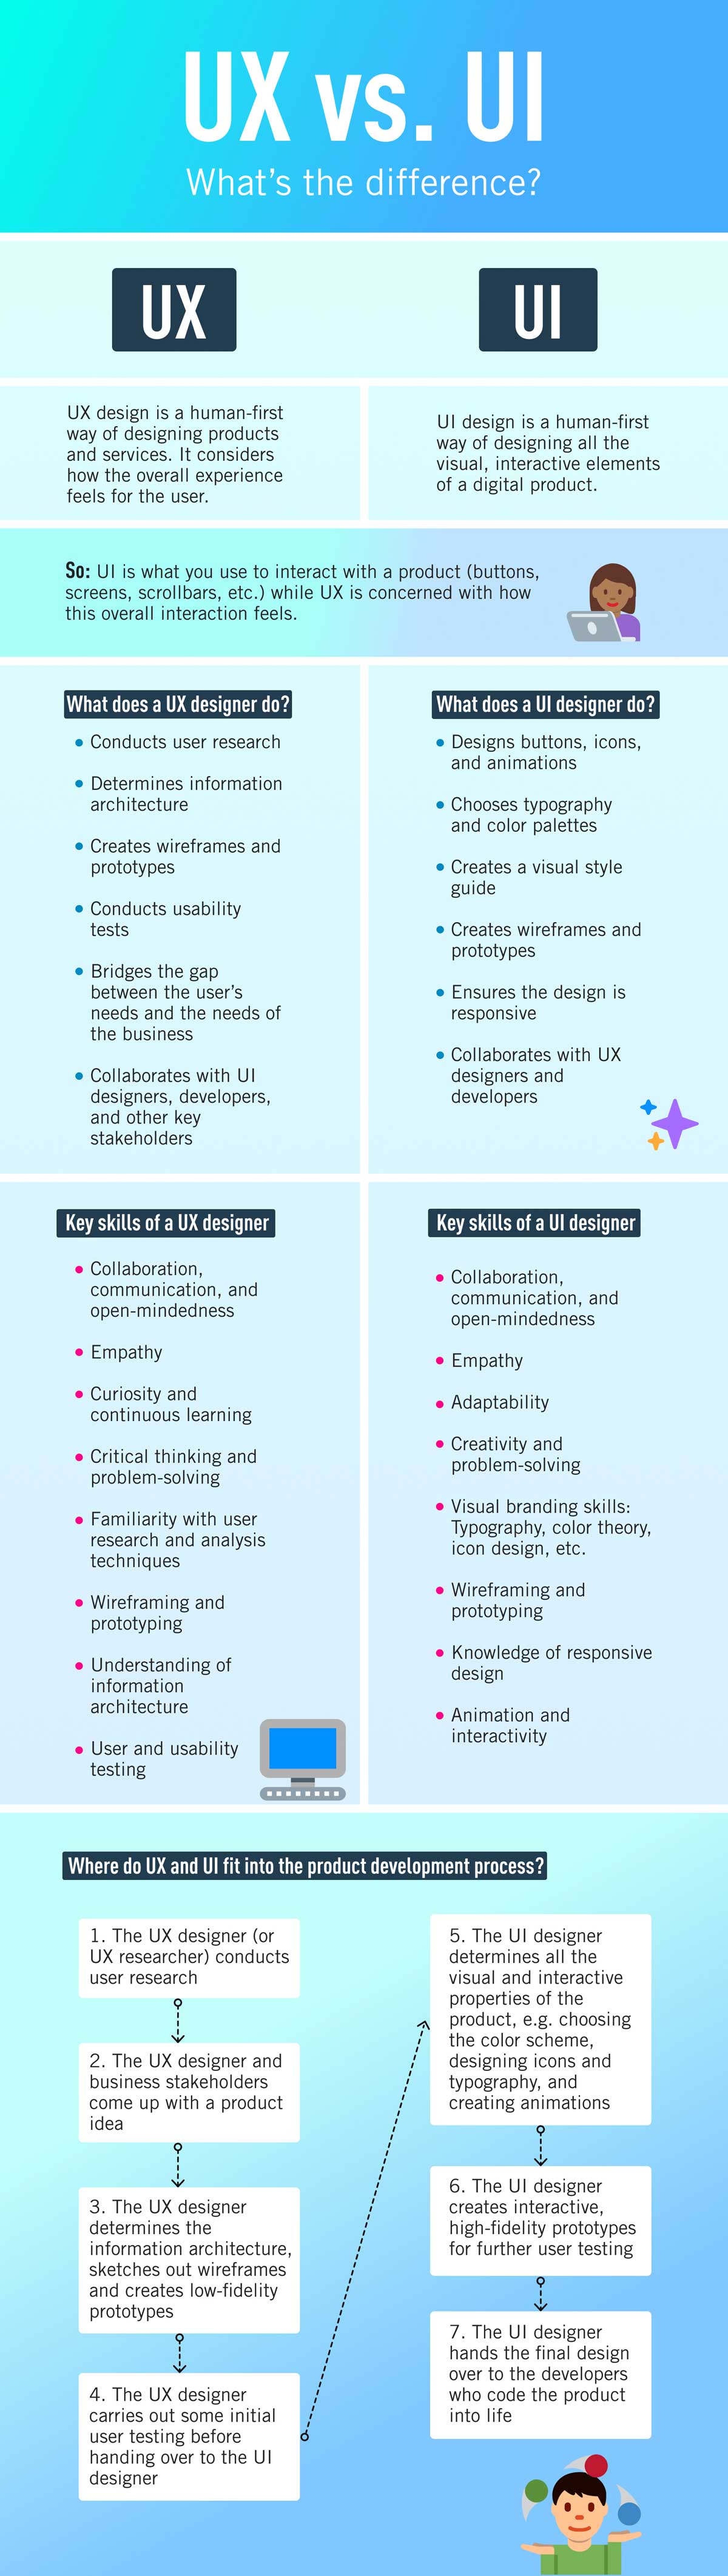 A full-page infographic listing the differences between UX and UI design in terms of tasks, skills, and where they fit into the overall product design process